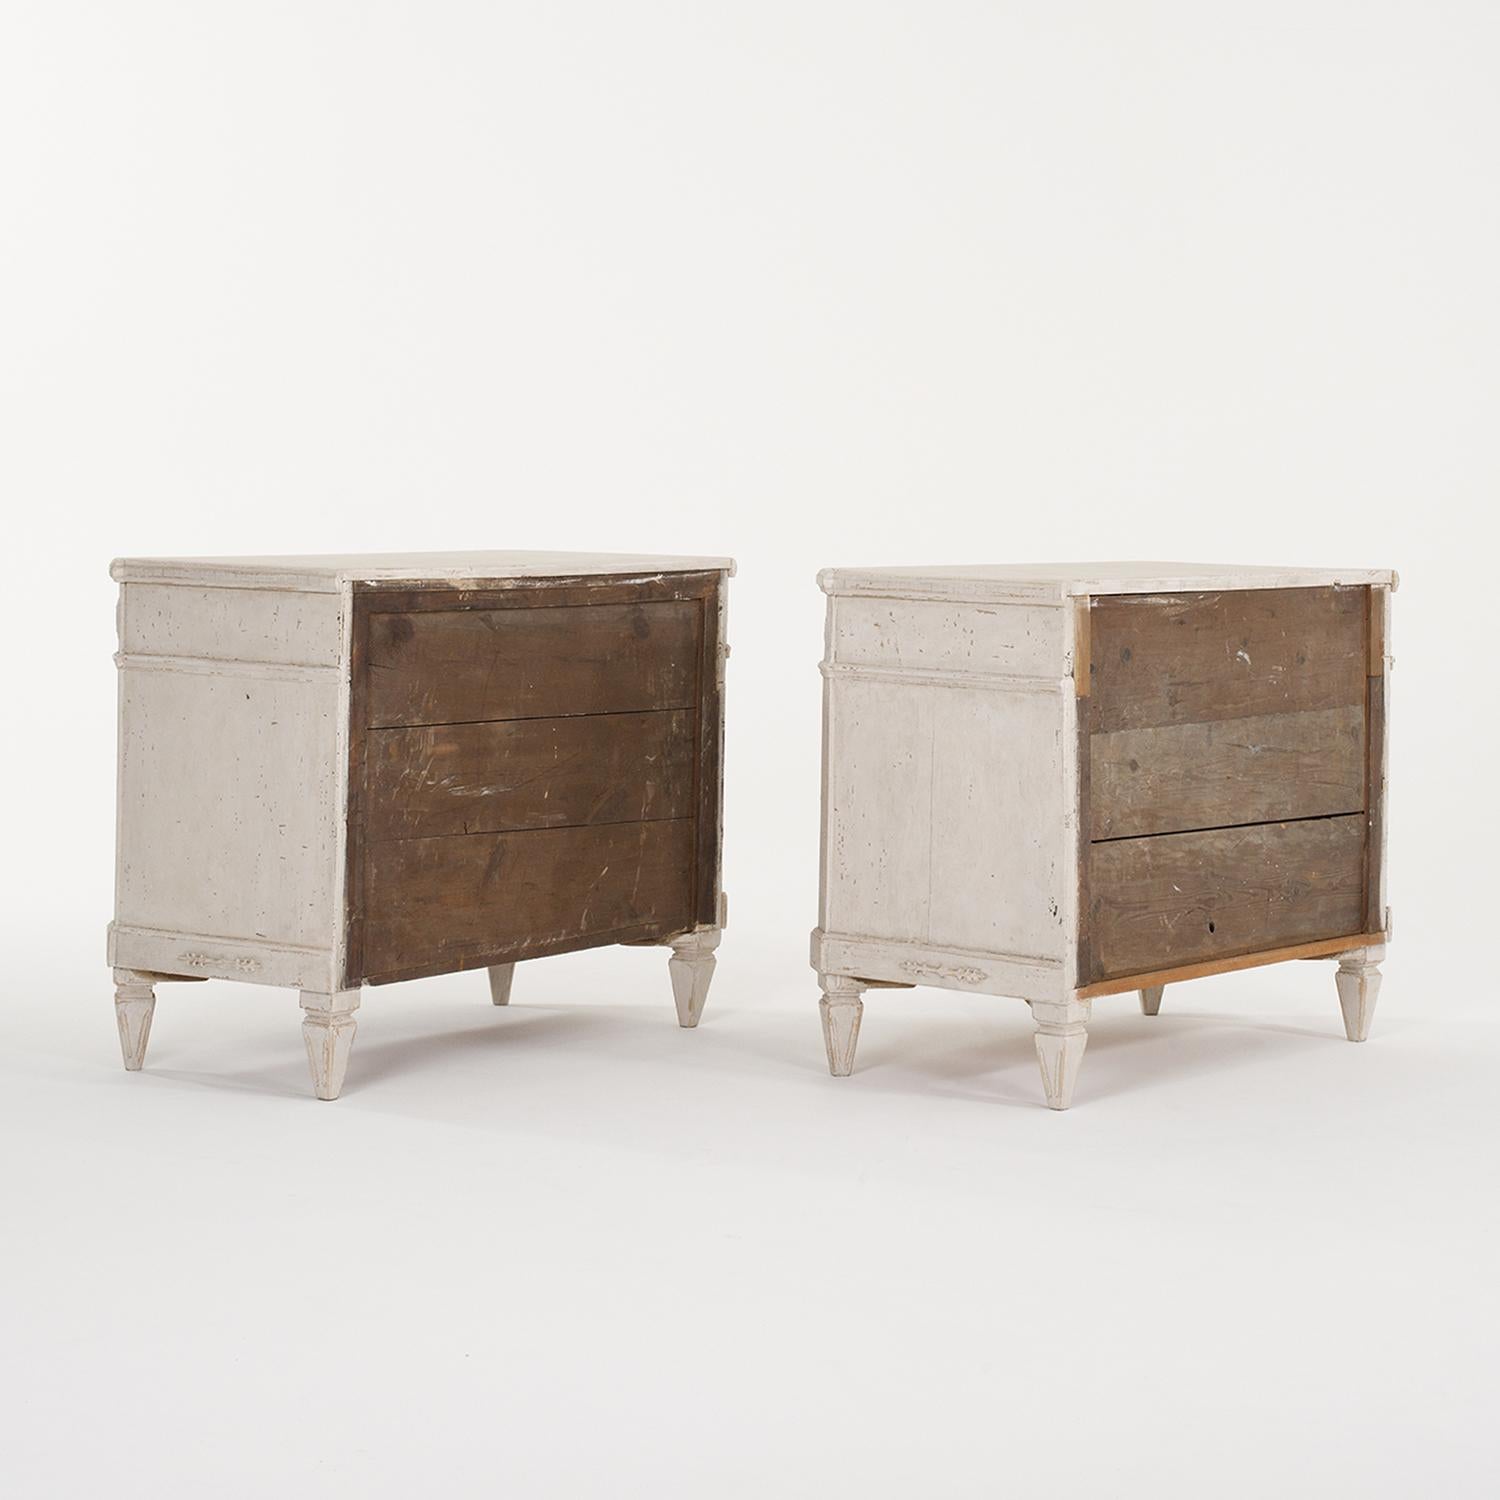 Metal 19th Century Swedish Gustavian Pair of Pinewood Chests - Antique Commodes For Sale